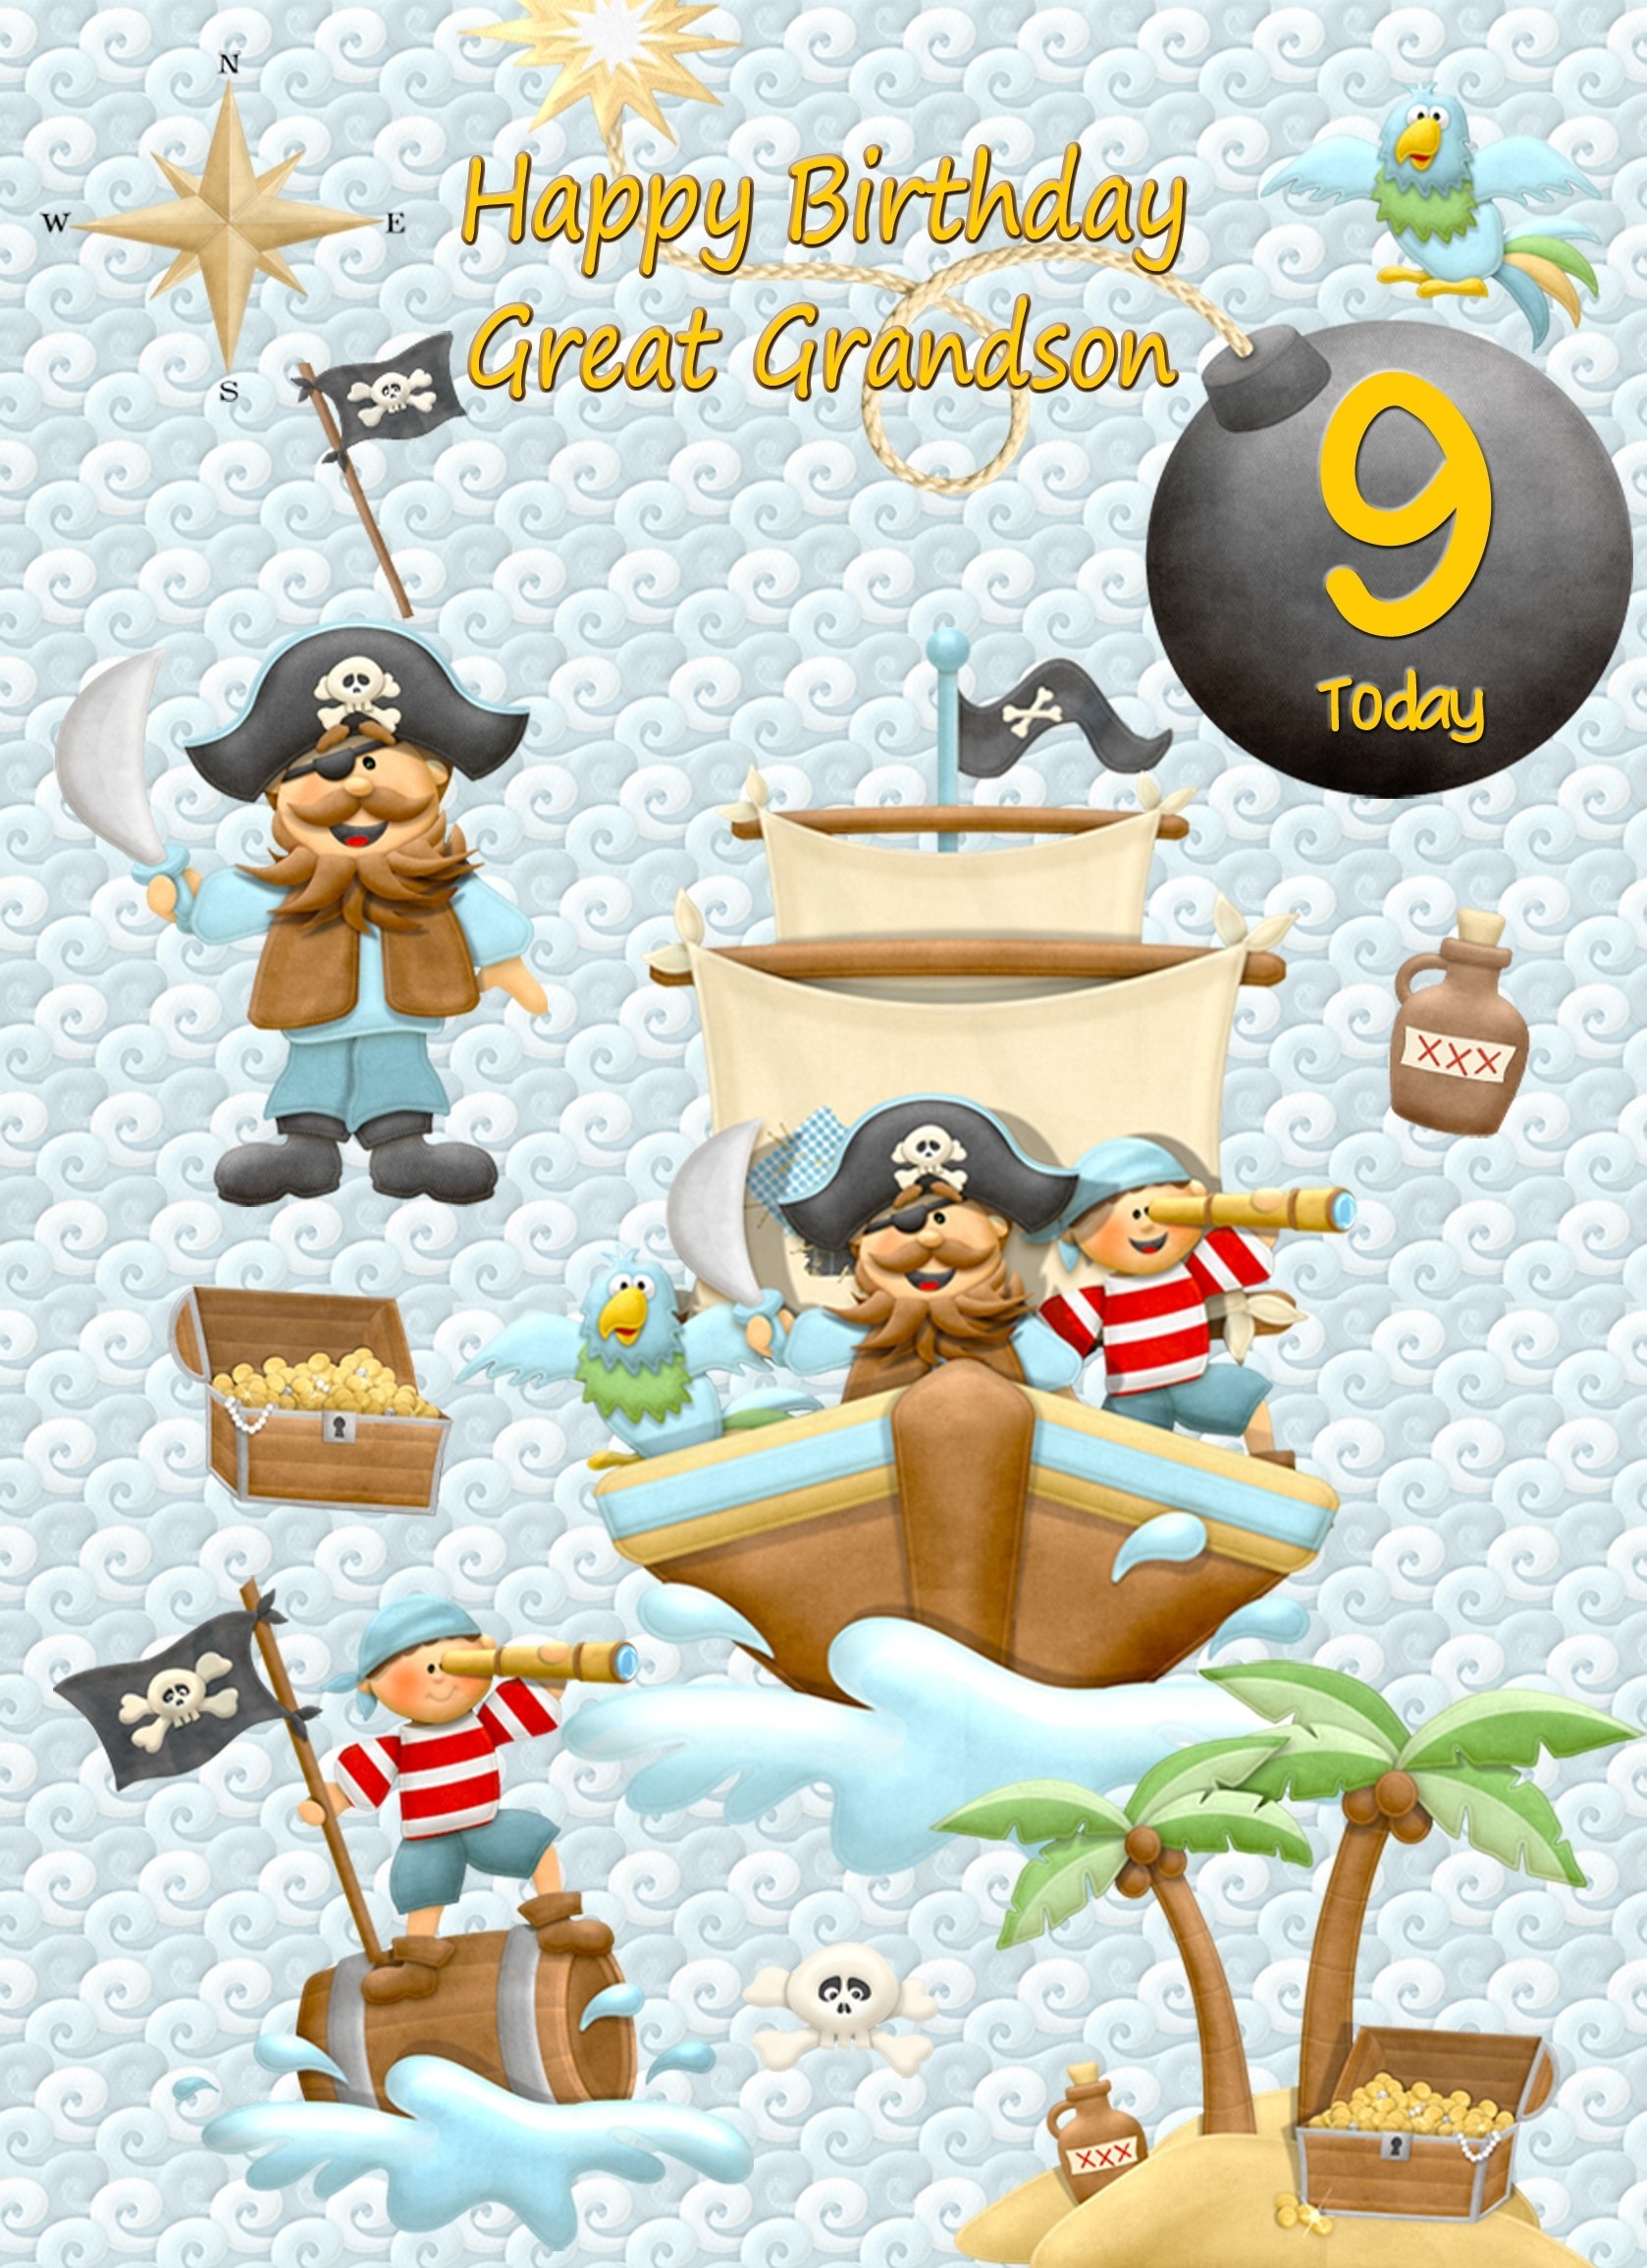 Kids 9th Birthday Pirate Cartoon Card for Great Grandson